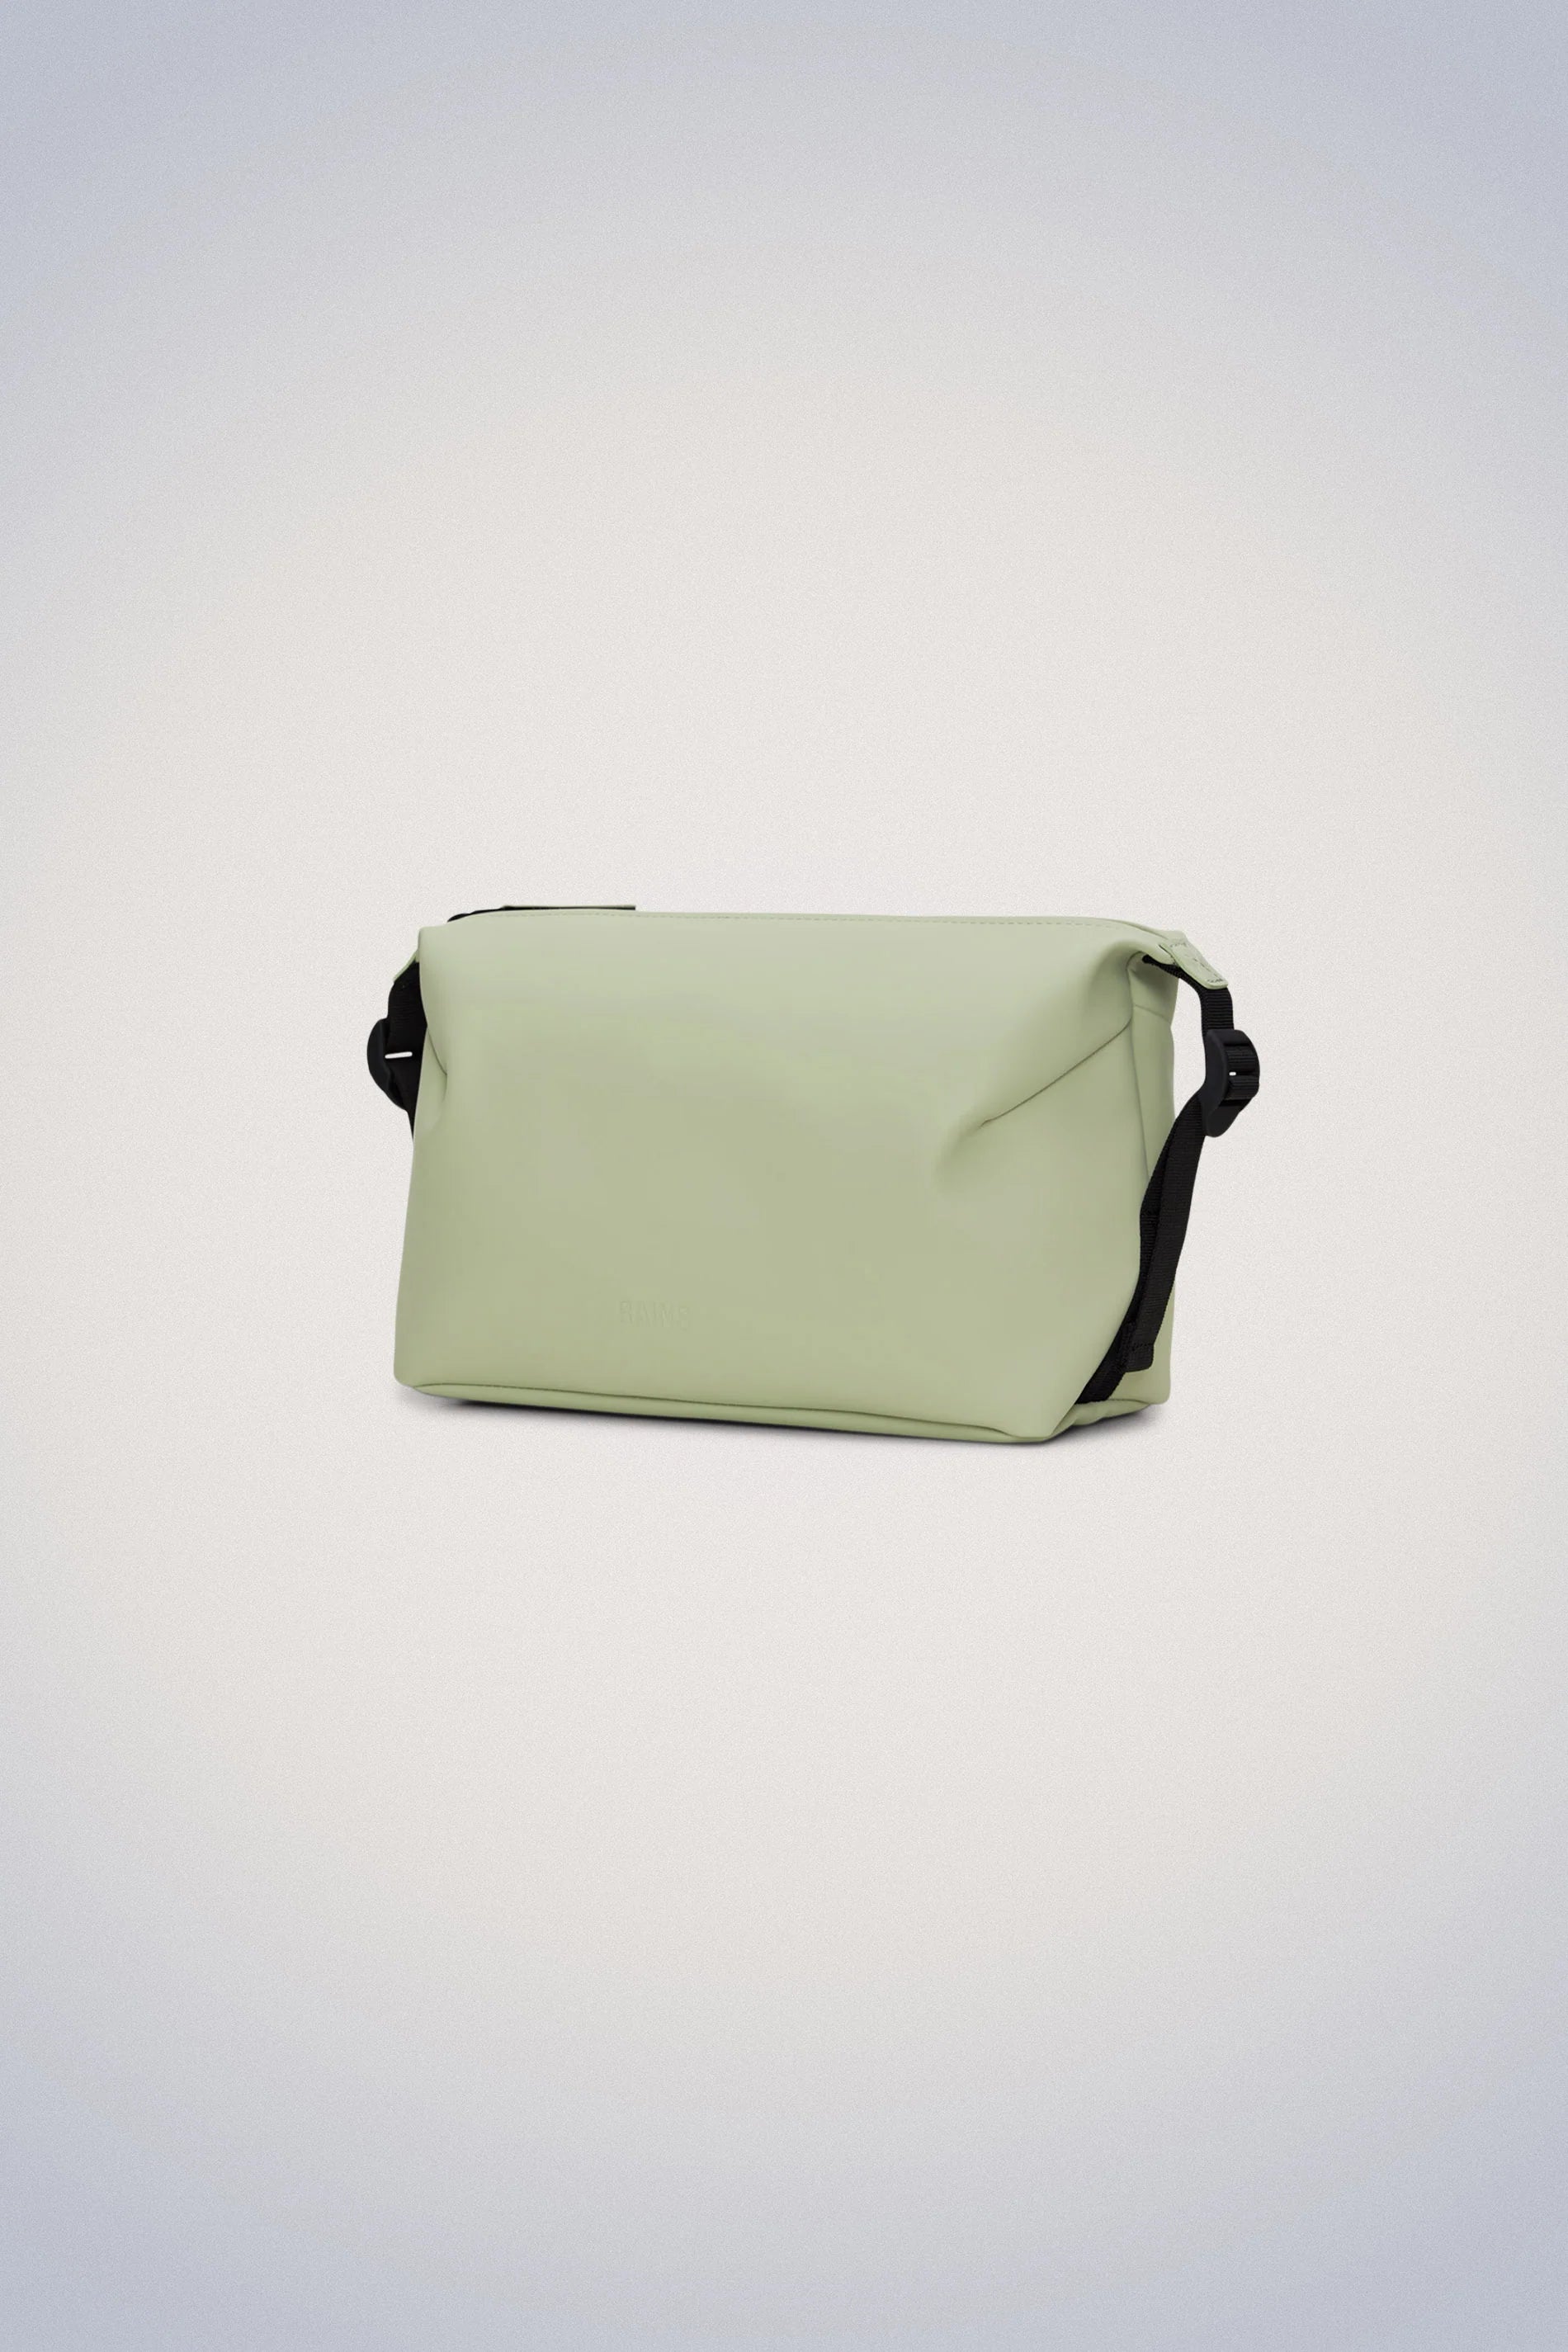 The Hilo Wash Bag - Earth by Rains, a waterproof toiletry bag, stands out on a white background.